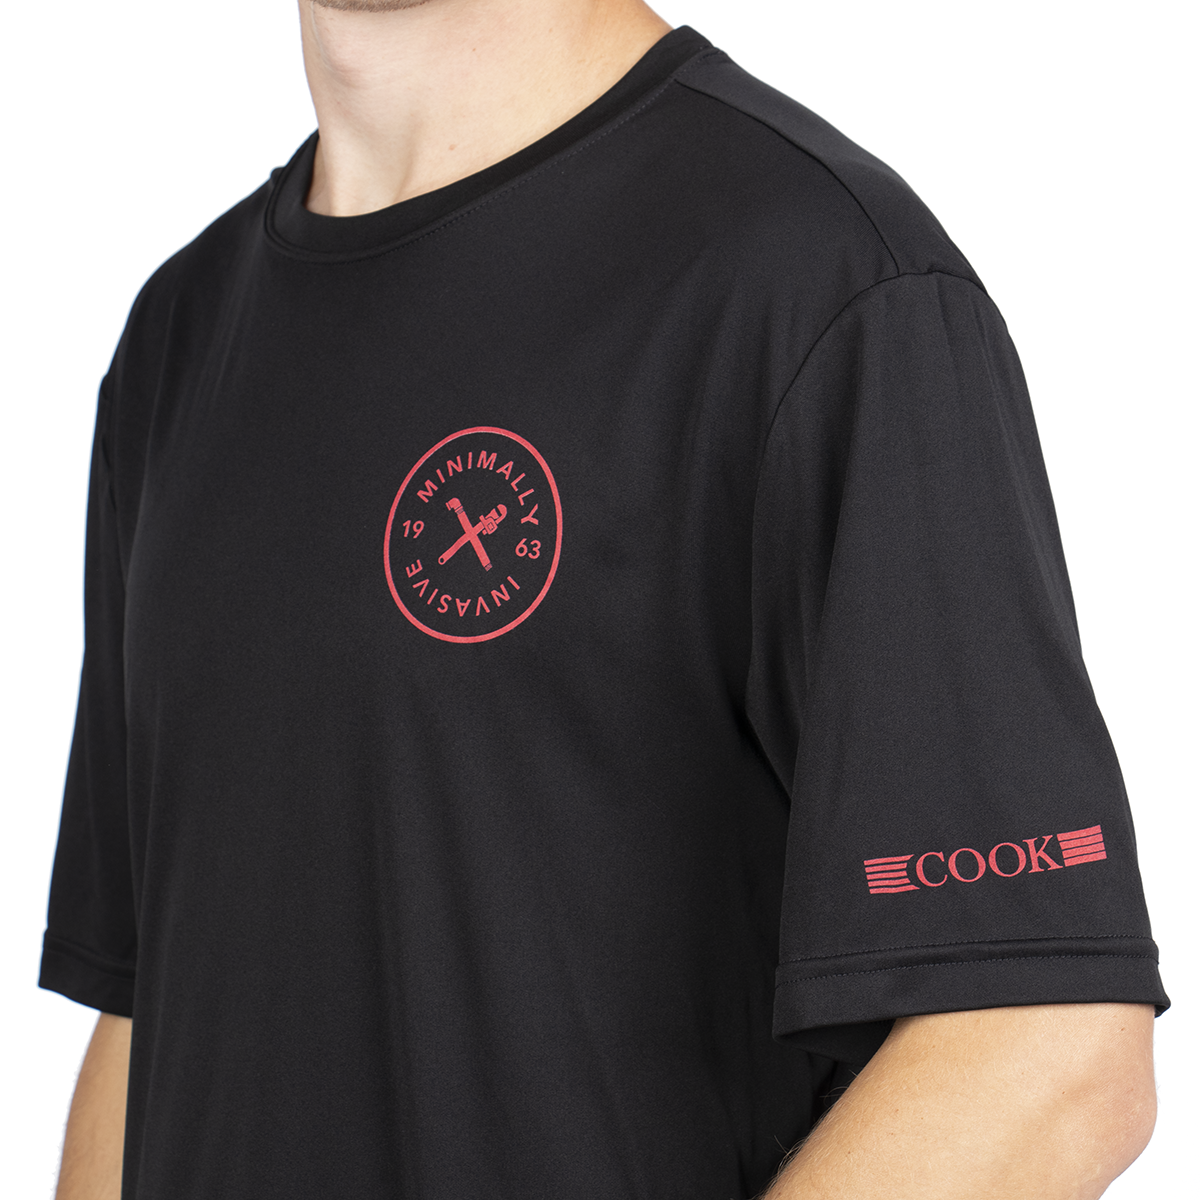 Competitor Tee - Red Logo